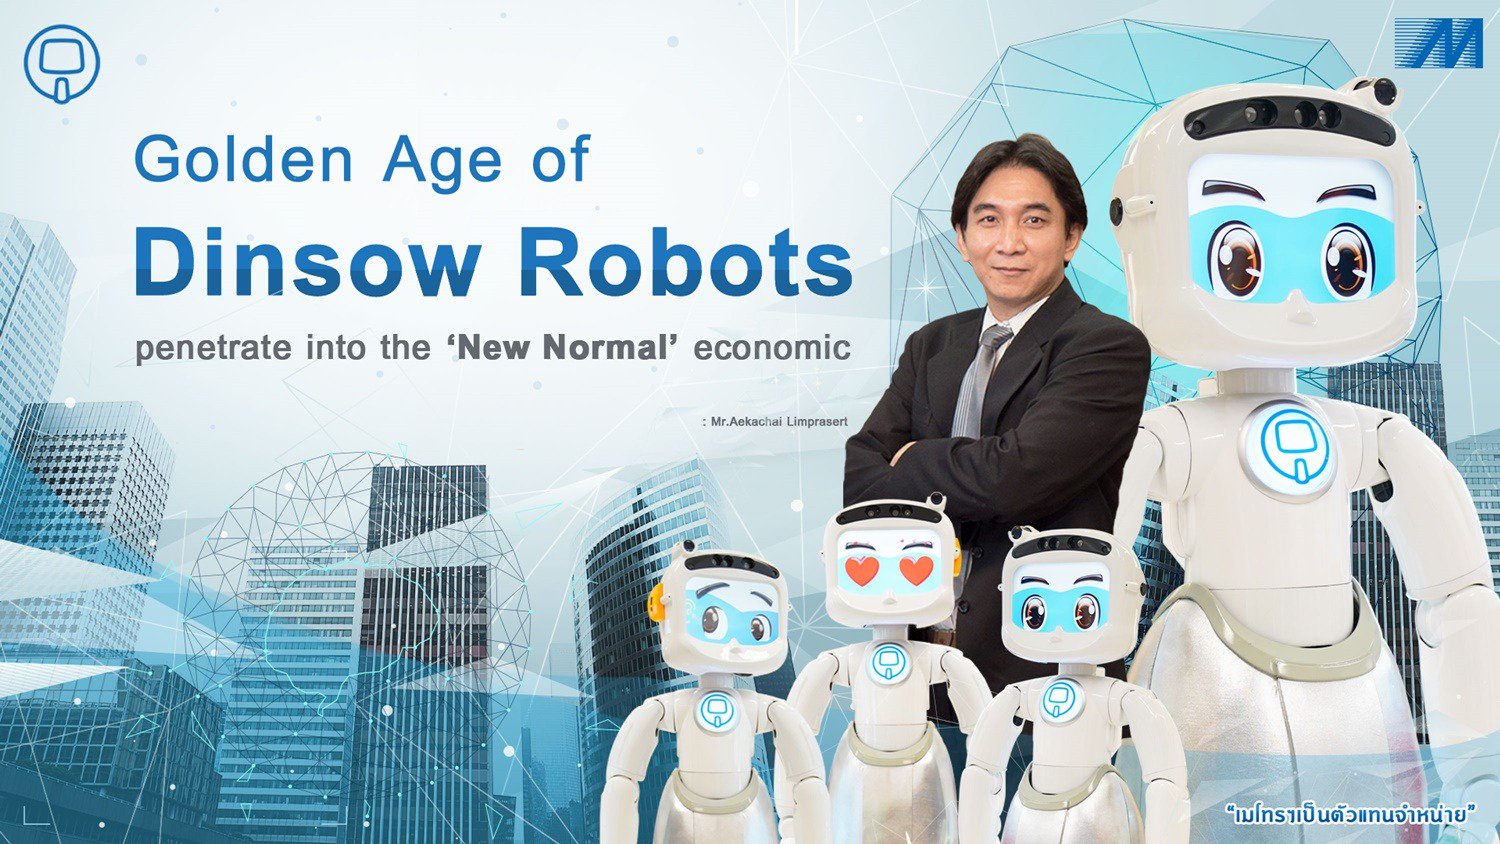 Golden Age of Dinsow Robots into the New Economic – Metro Systems Corporation Plc.